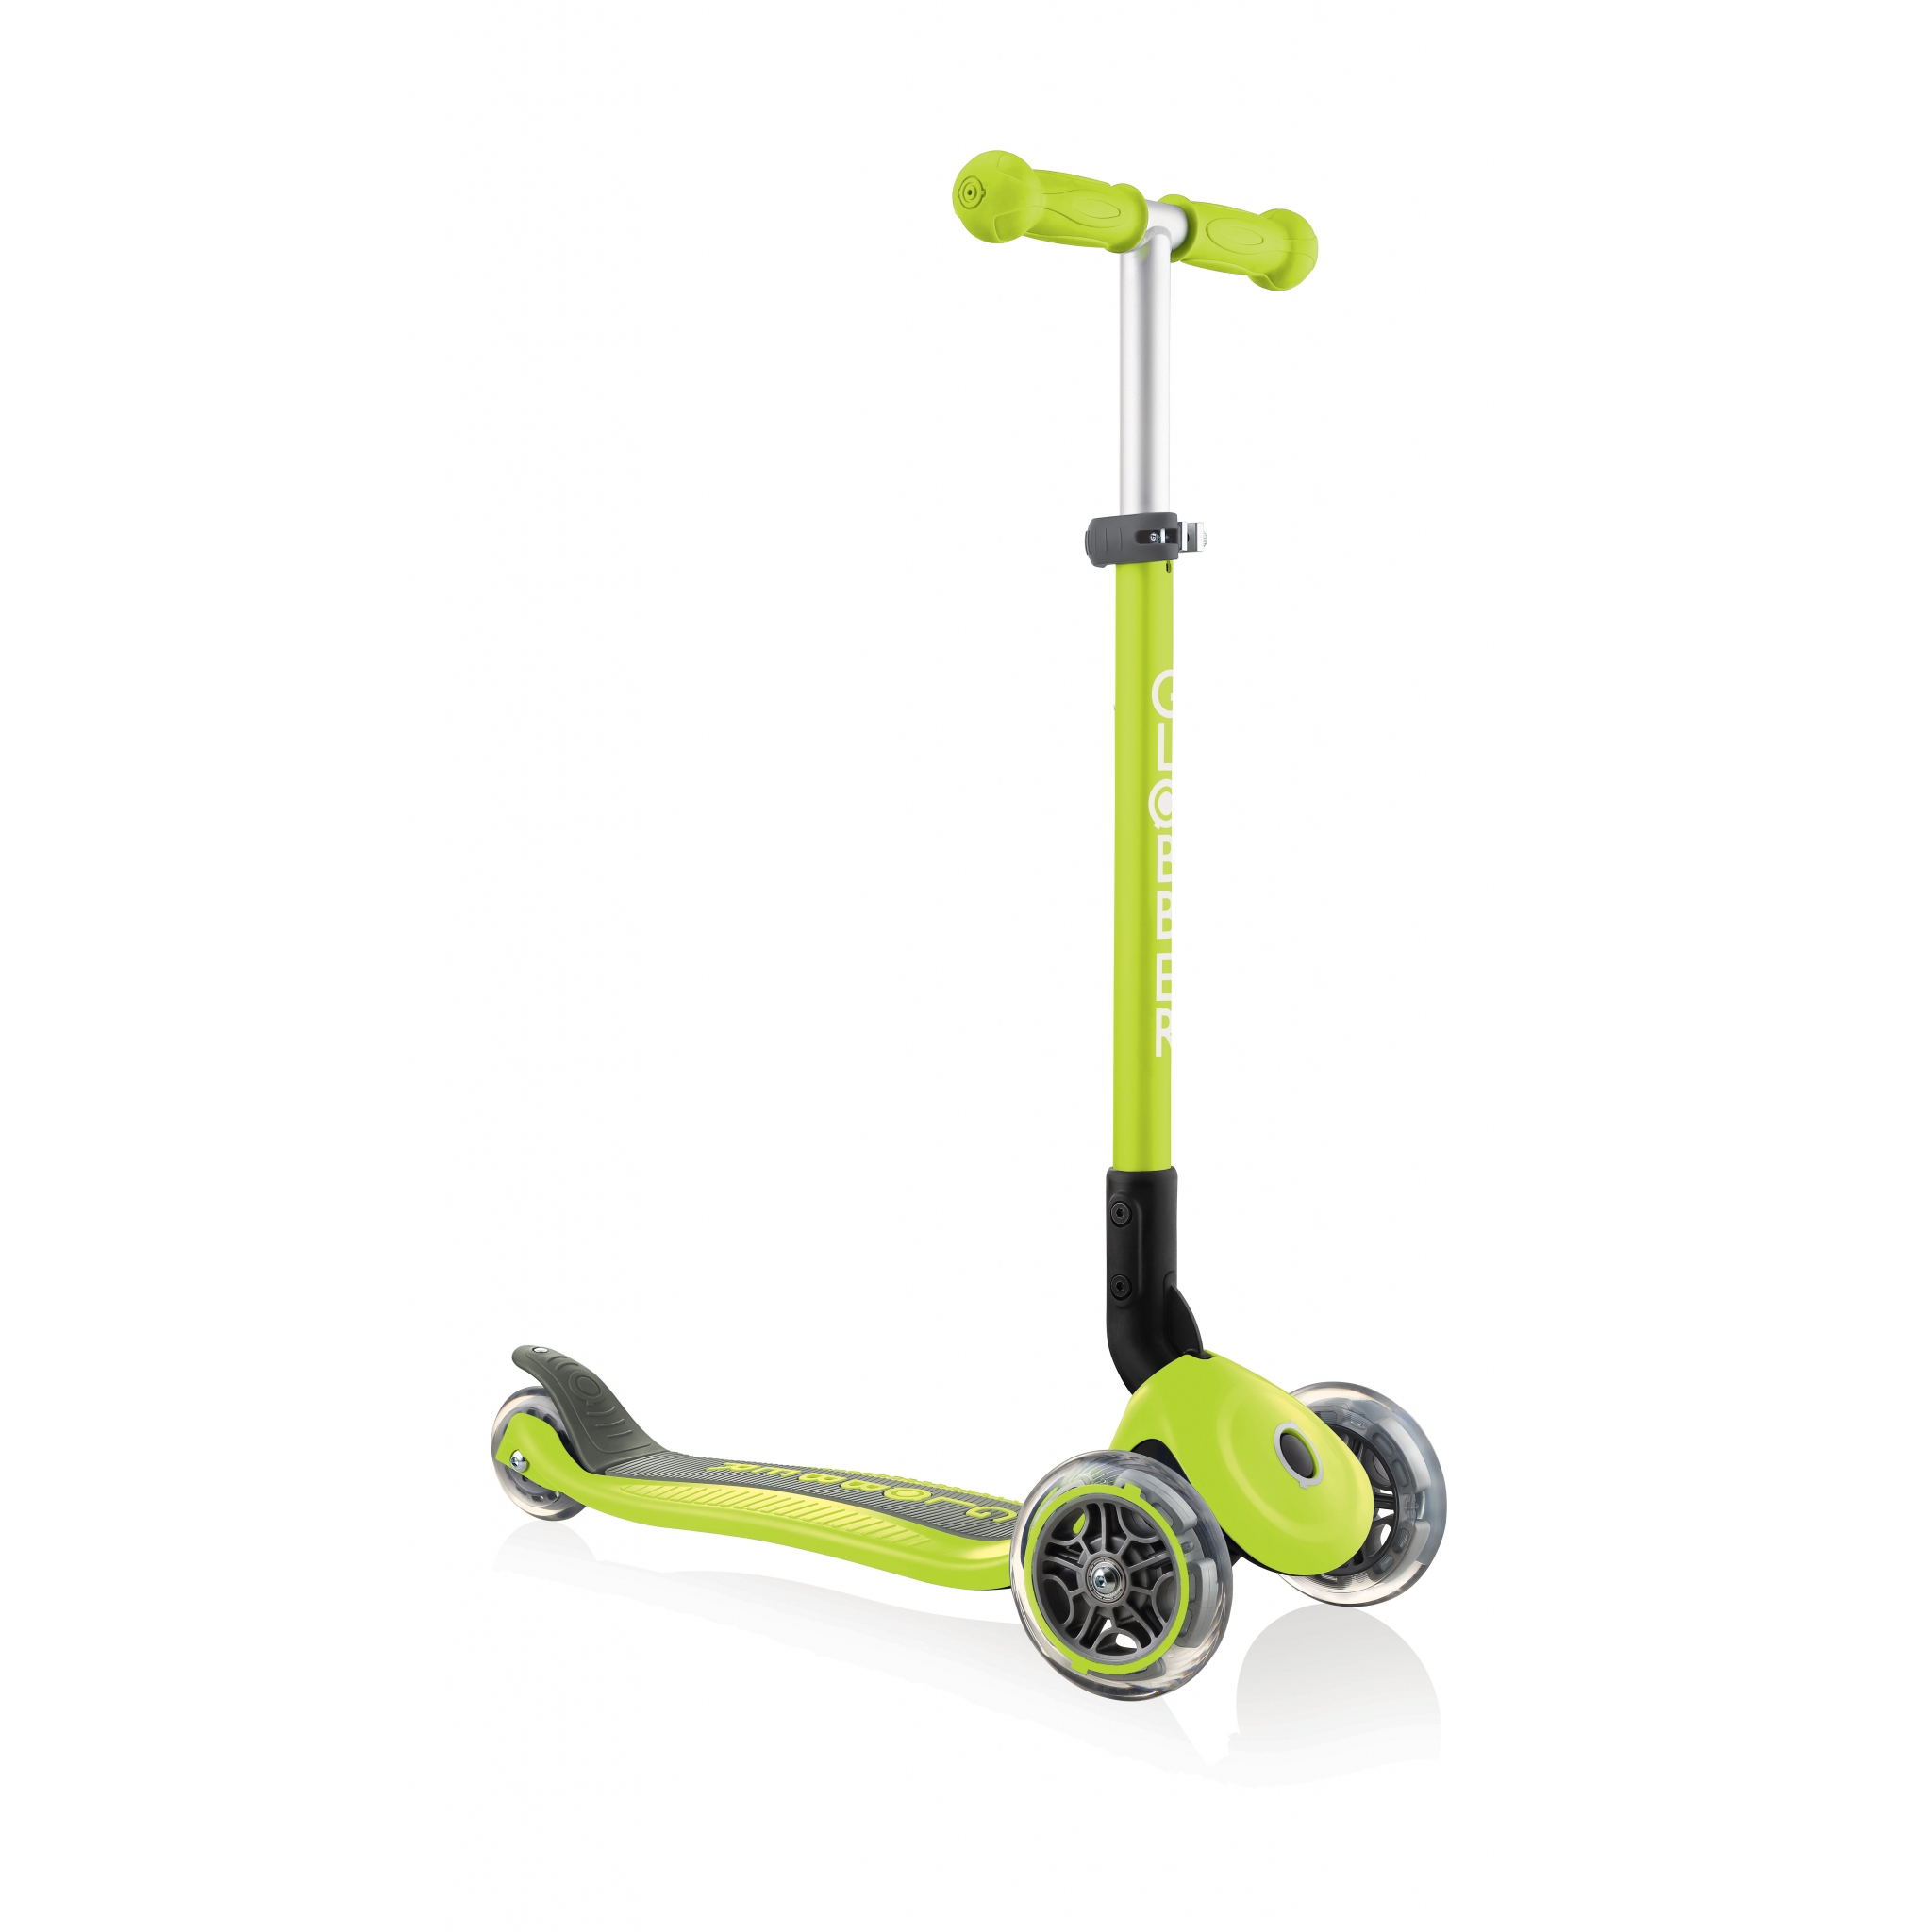 PRIMO-FOLDABLE-3-wheel-foldable-scooter-for-kids-lime-green 2